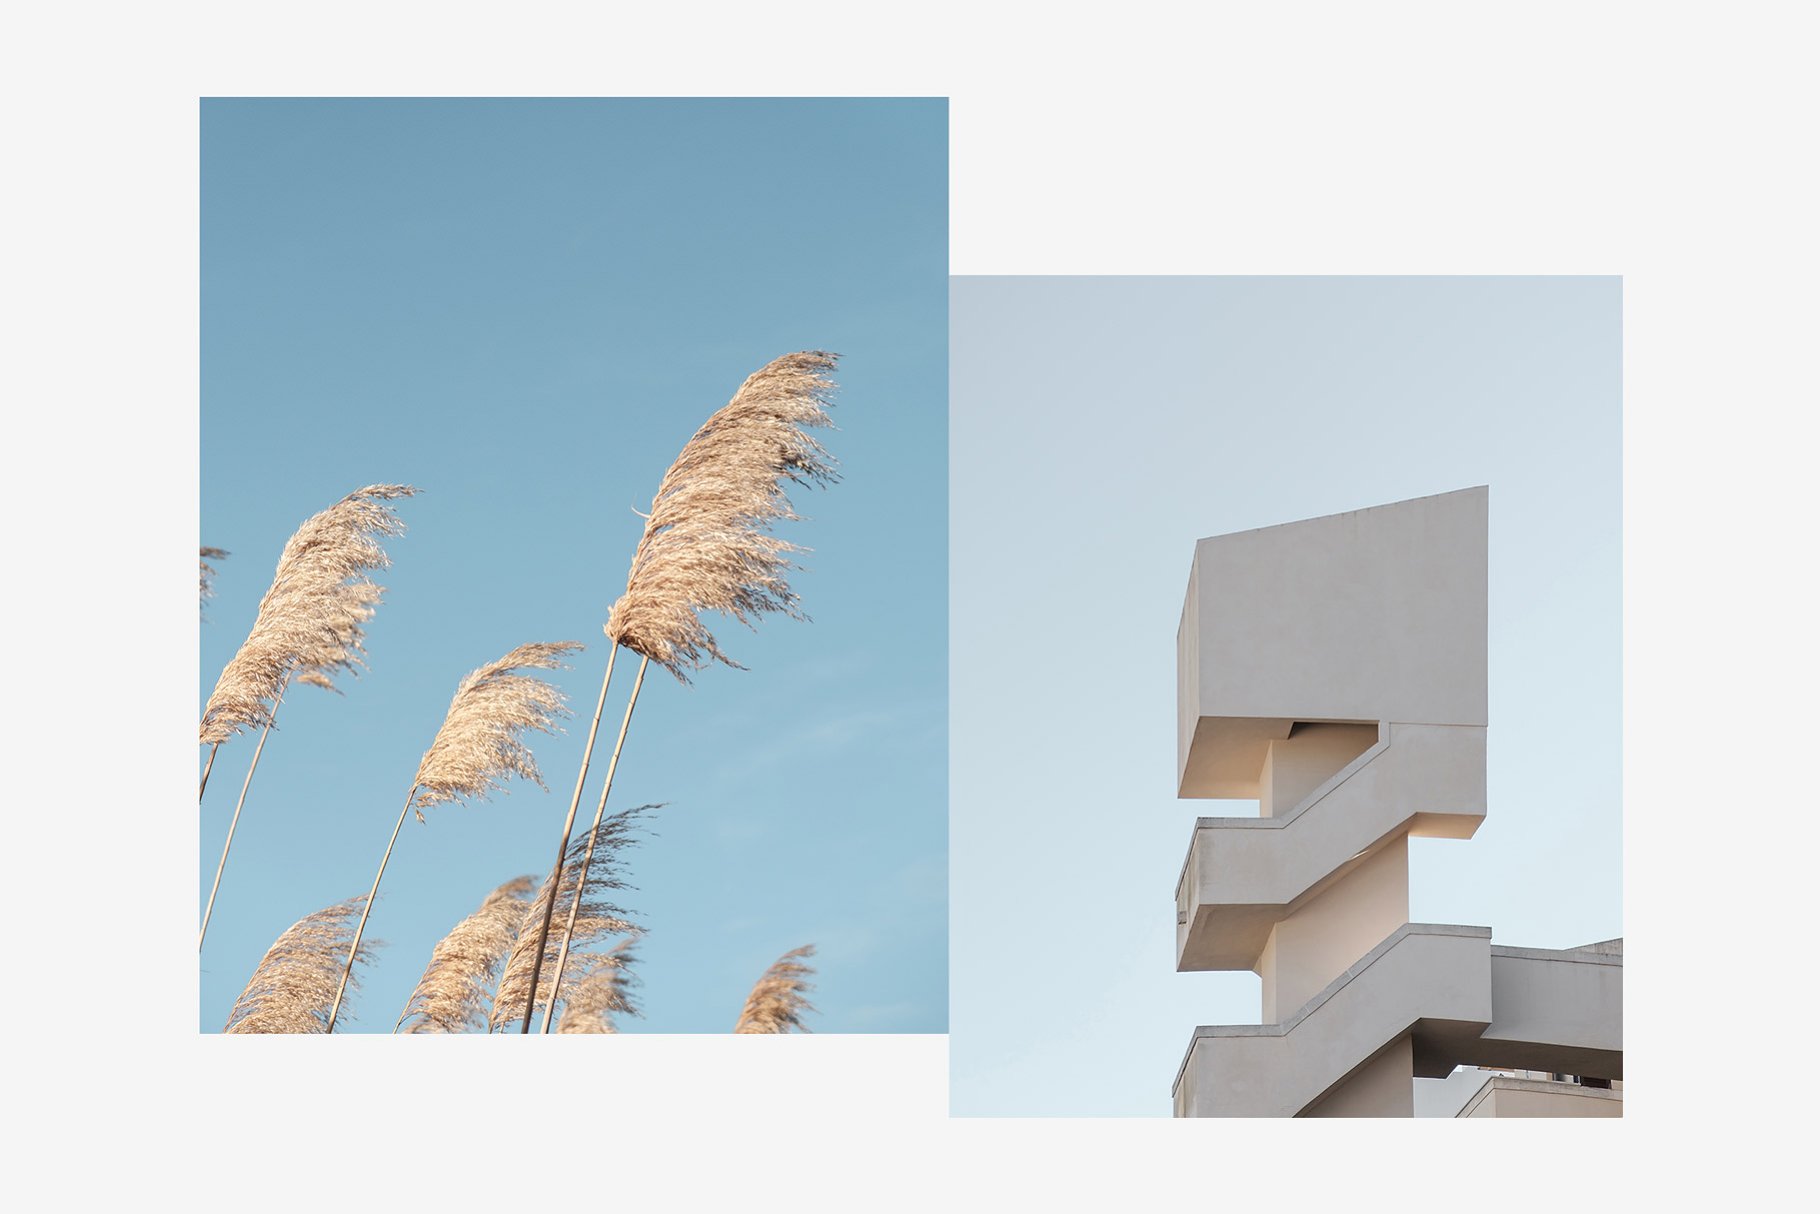 2 minimalist photos - spikelets against the sky and the facade of the building.